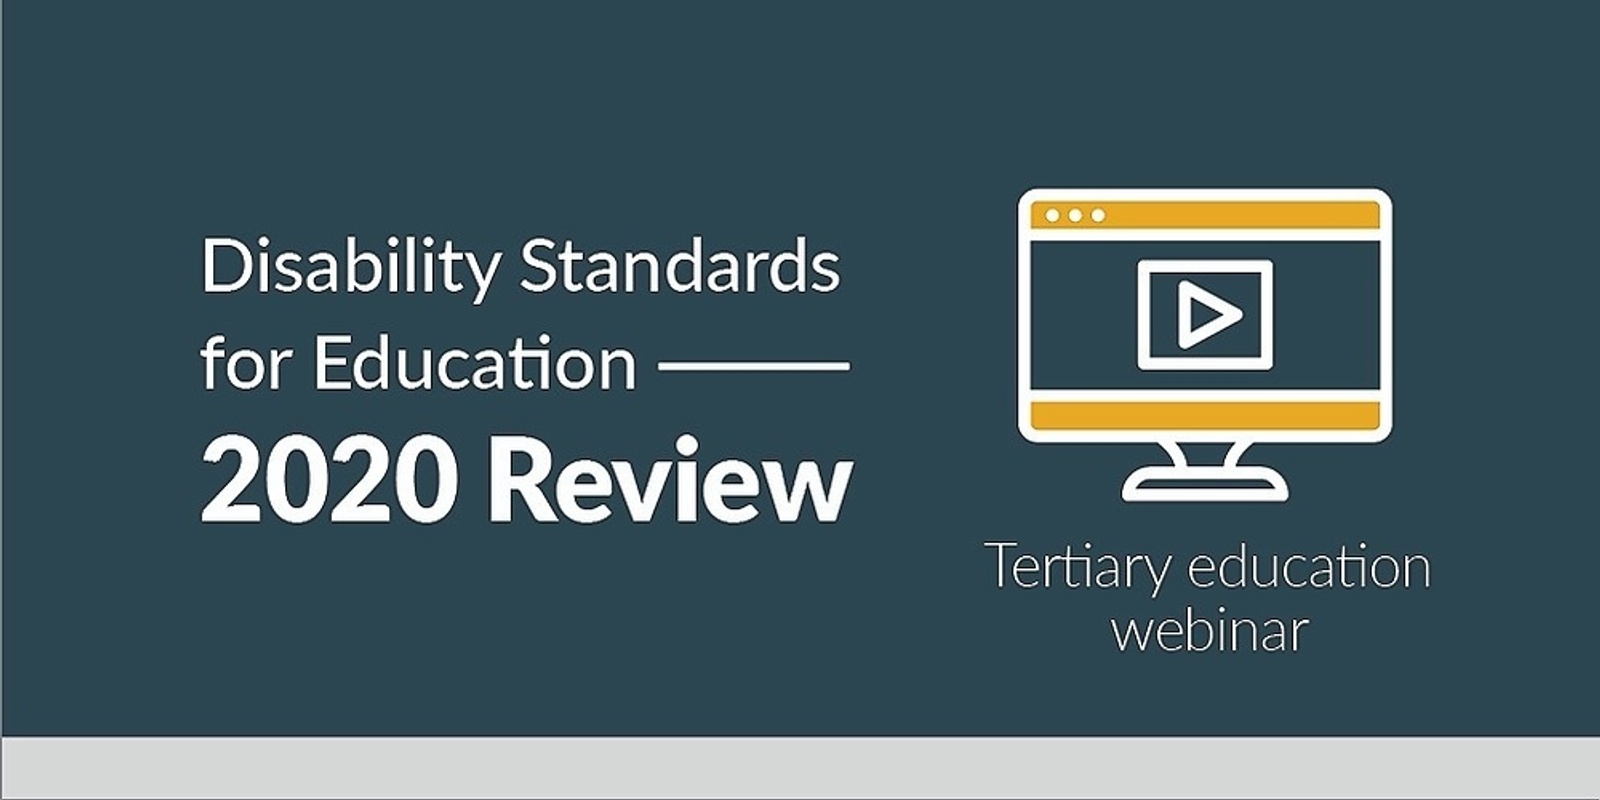 Banner image for Tertiary webinar - 2020 Review of the Disability Standards for Education